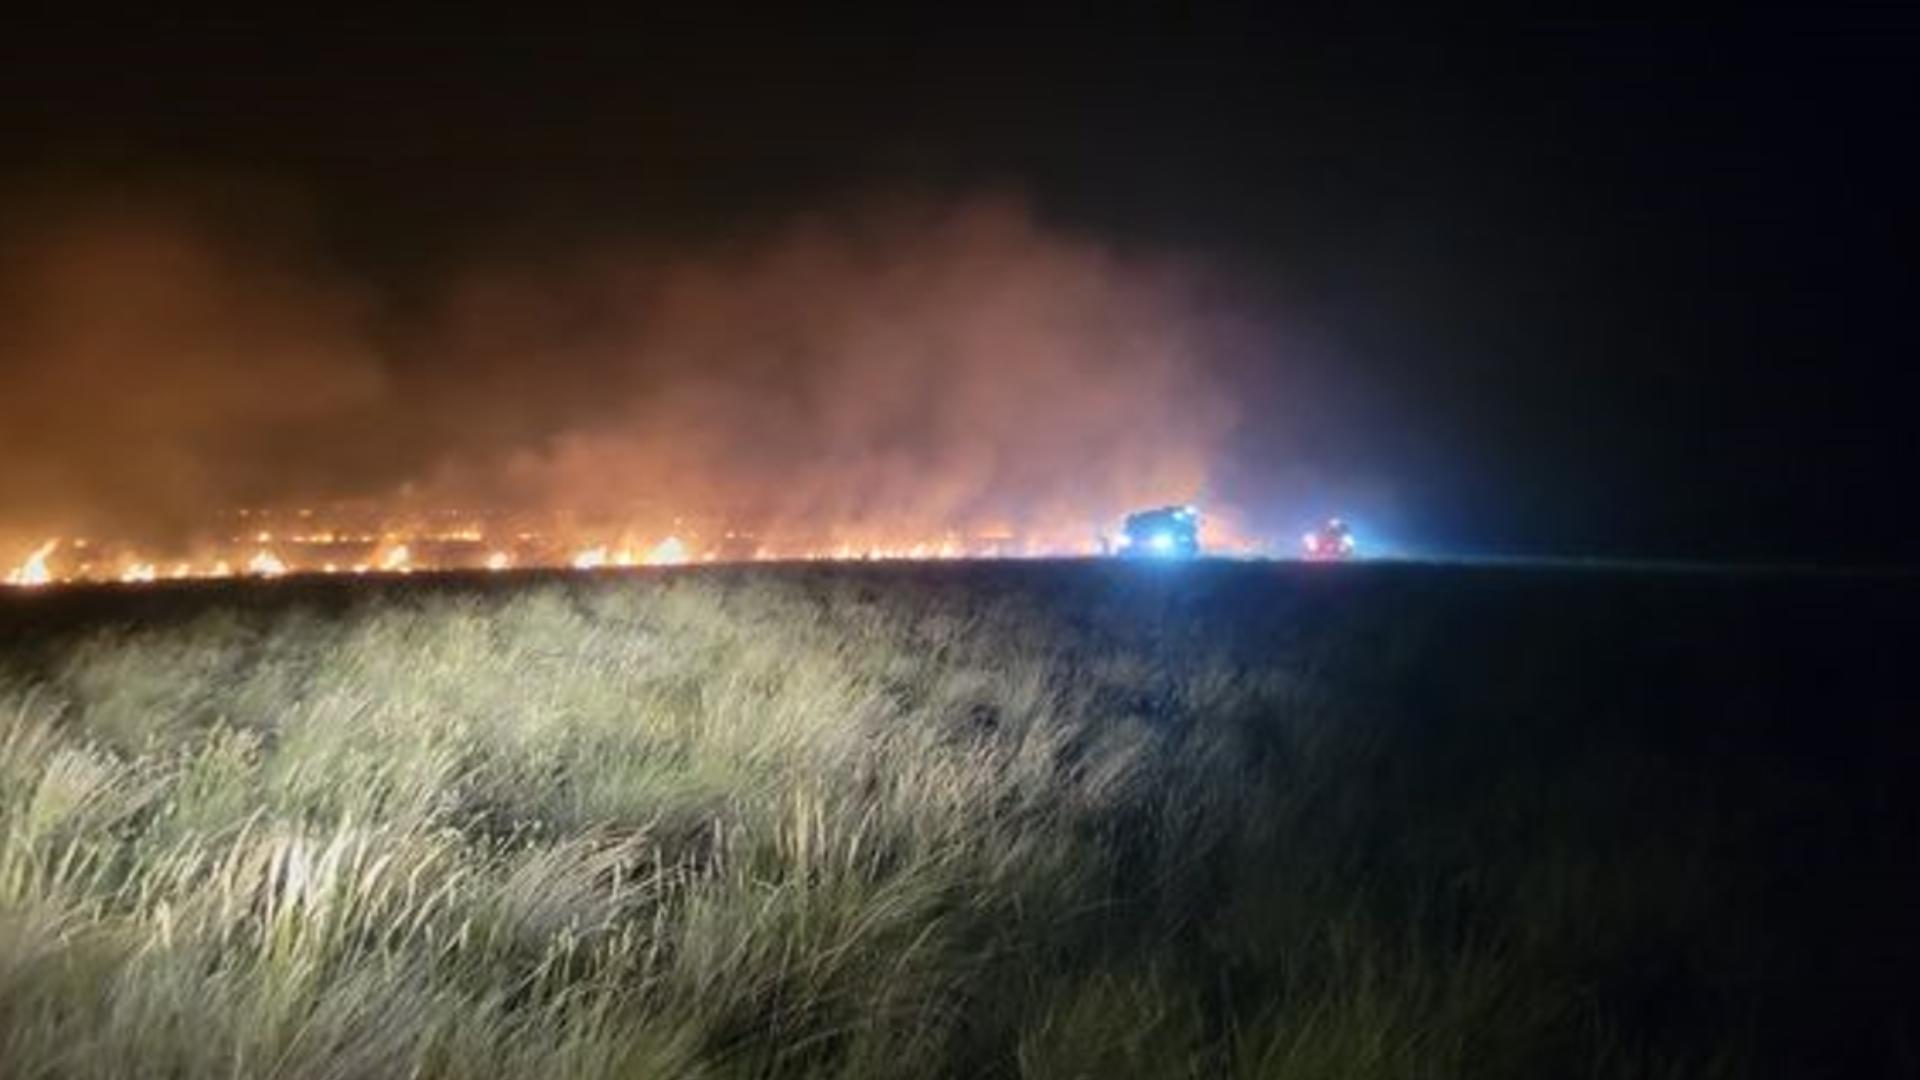 The Bureau of Land Management said crews worked through the night after lighting caused three fires south of Glenns Ferry.